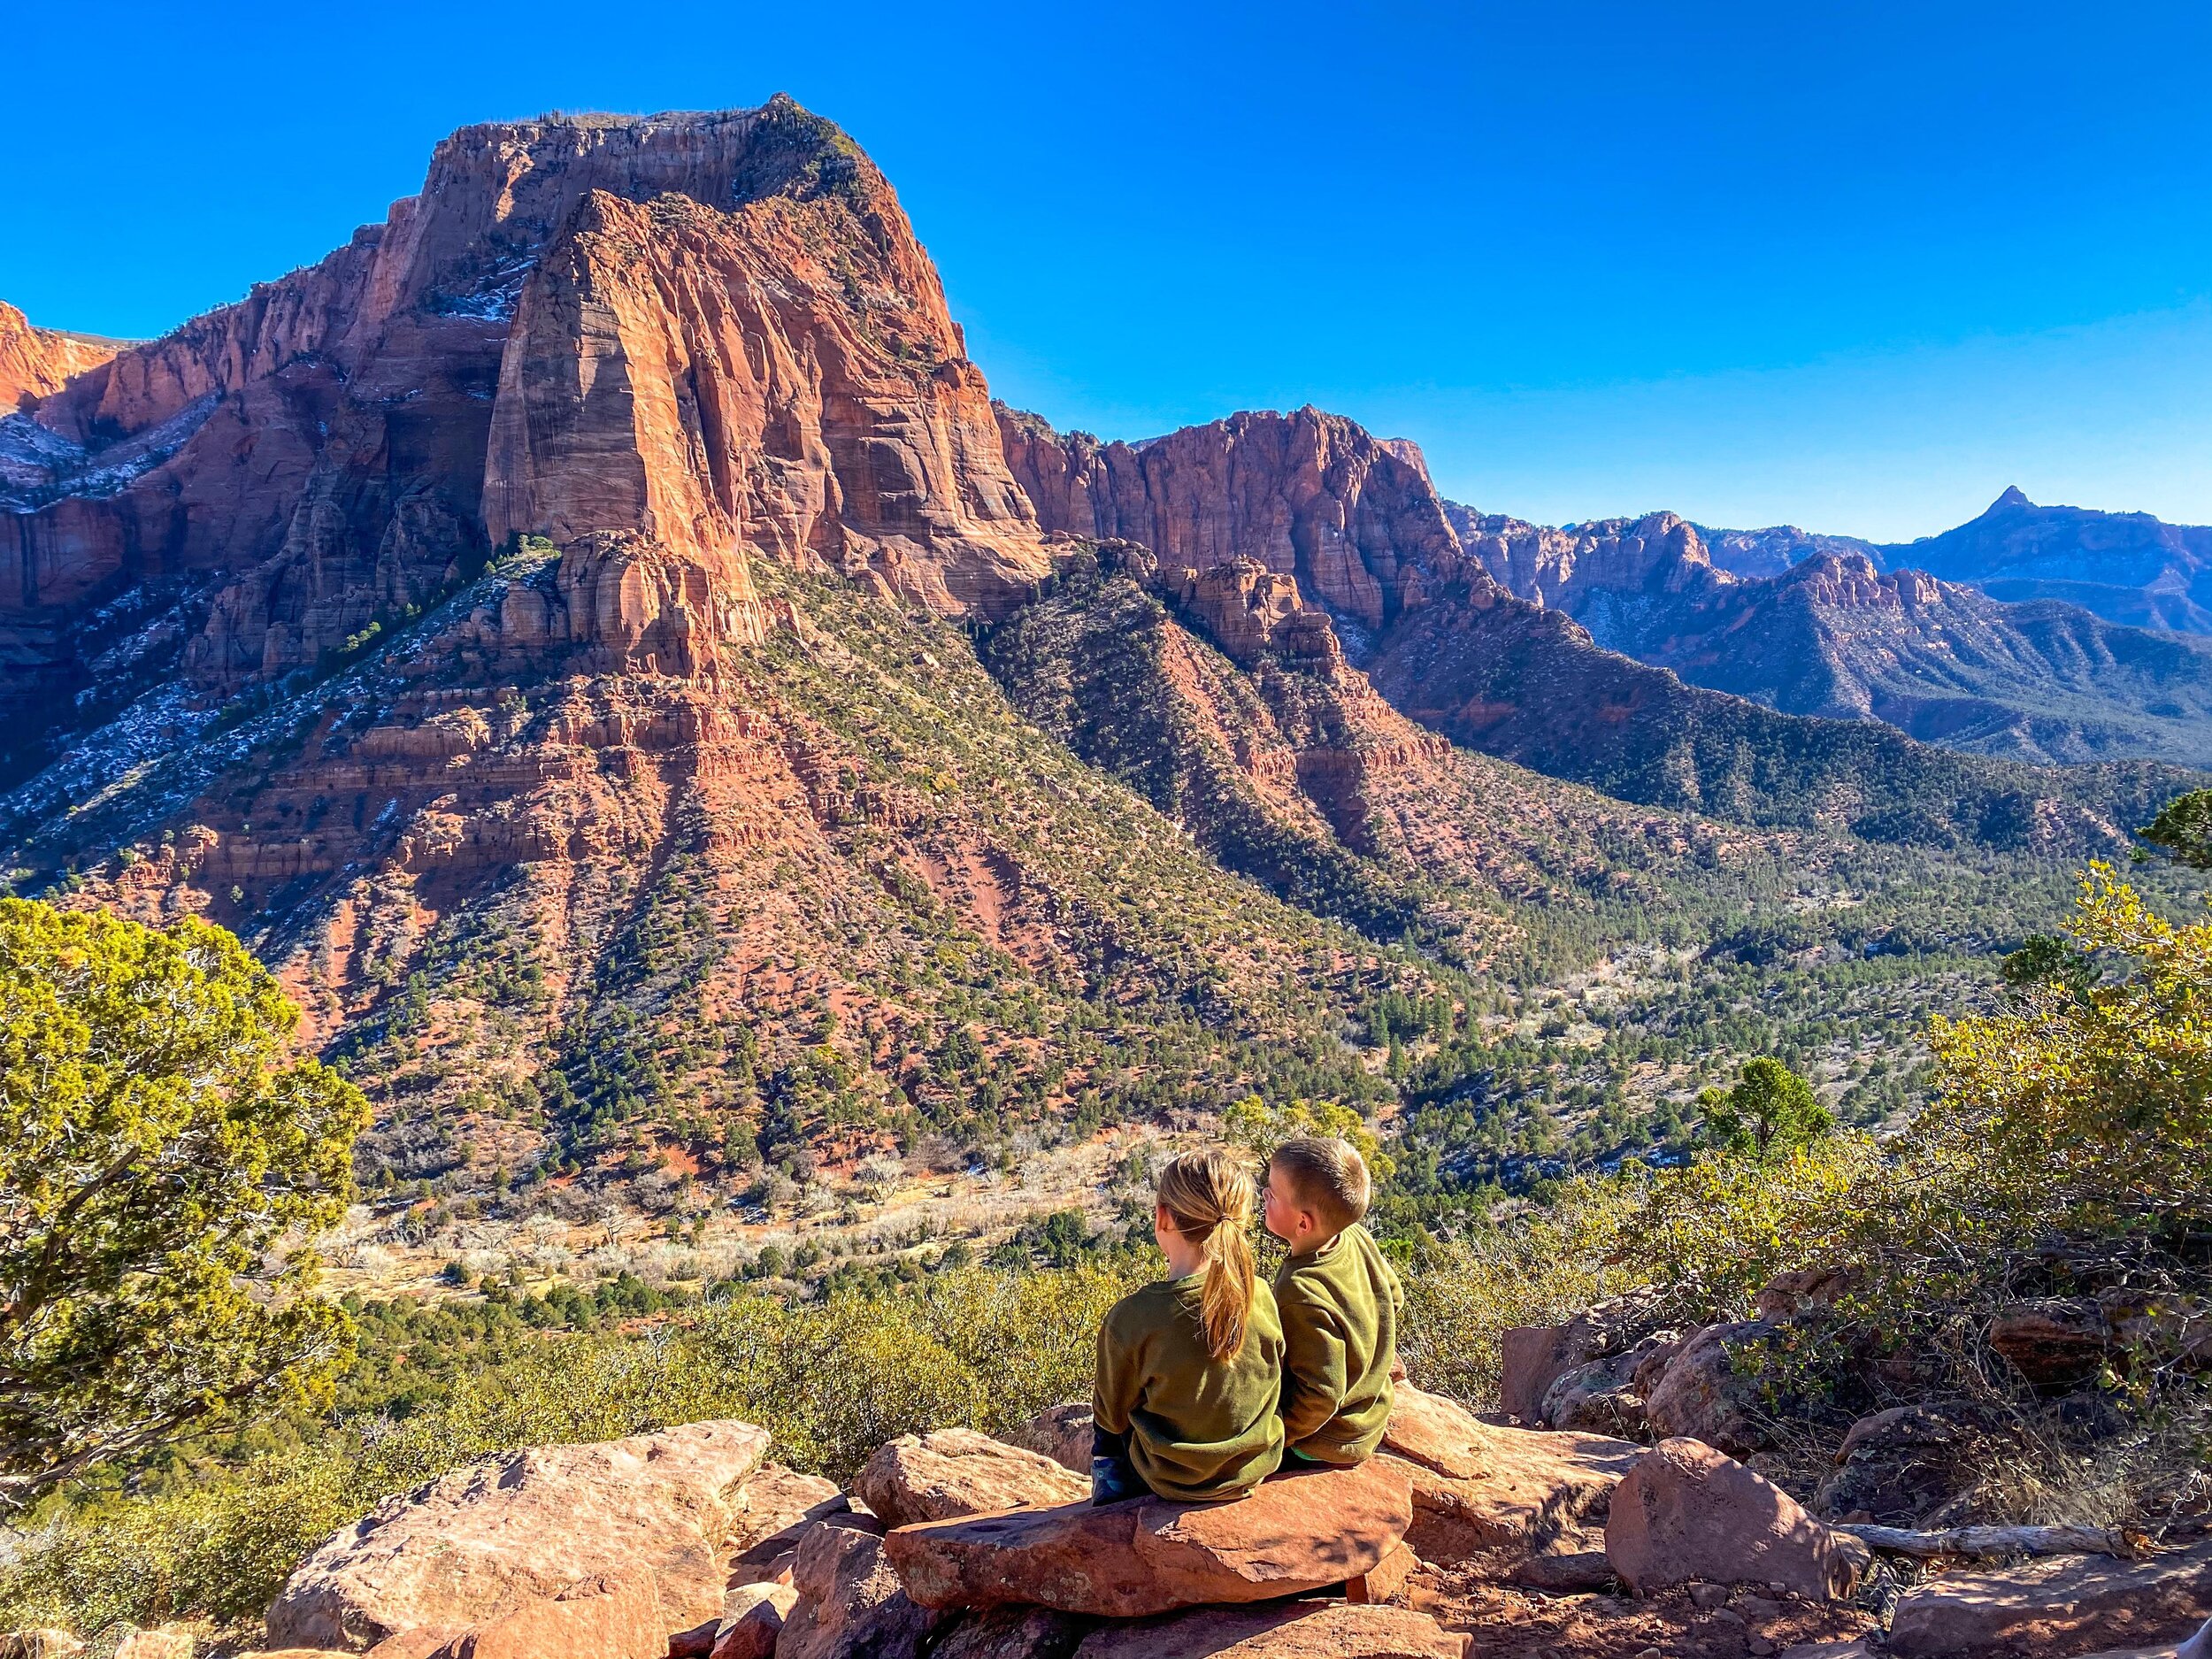 This is the view from the end of the timber creek overlook trail - the kolob canyon overlook